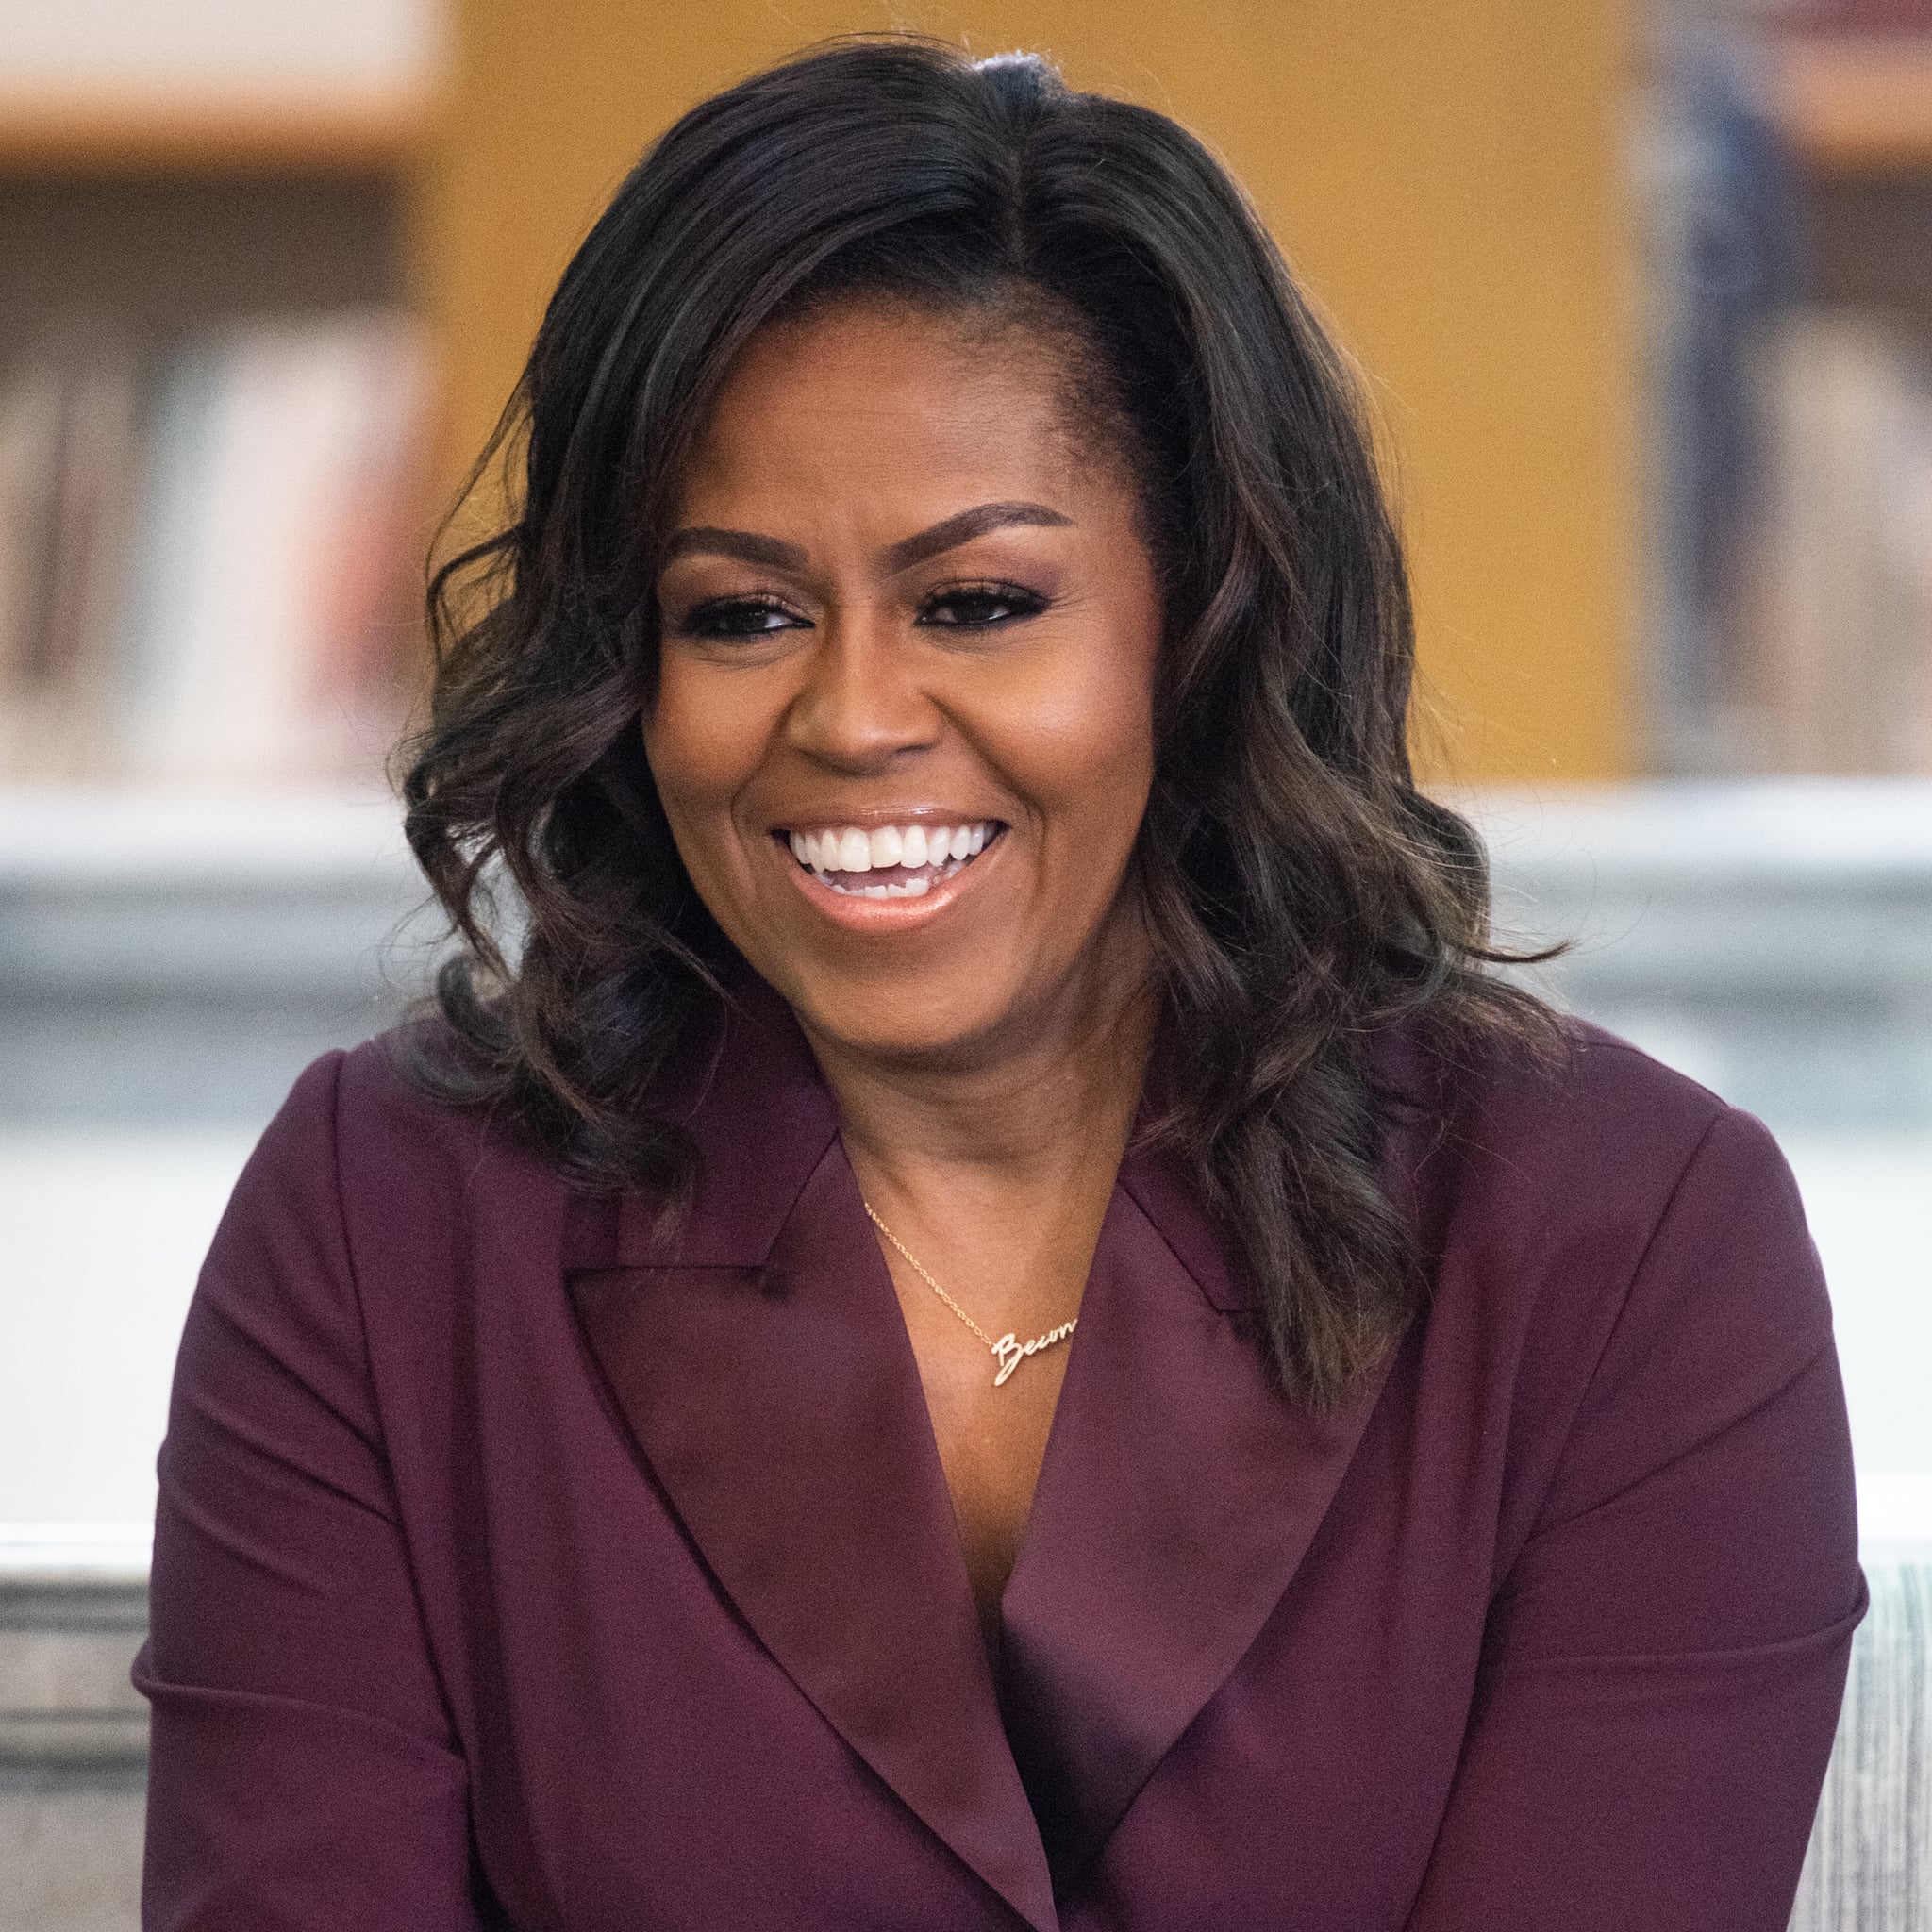 Michelle Obama Speaks On How She Felt ‘Cheated’ After Giving Up Her Career For Barack?